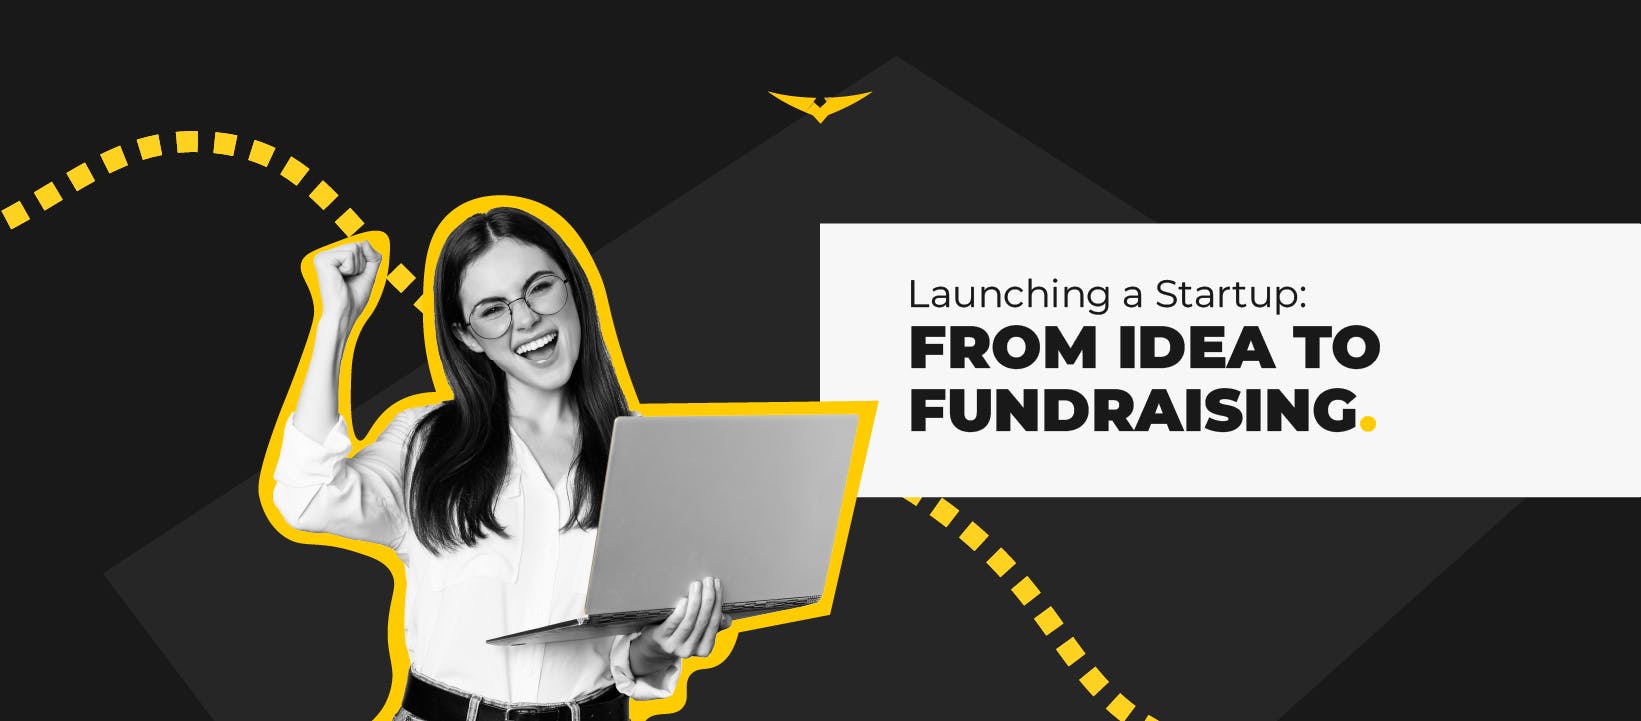 Launching a Startup: From Idea to Fundraising [Template]